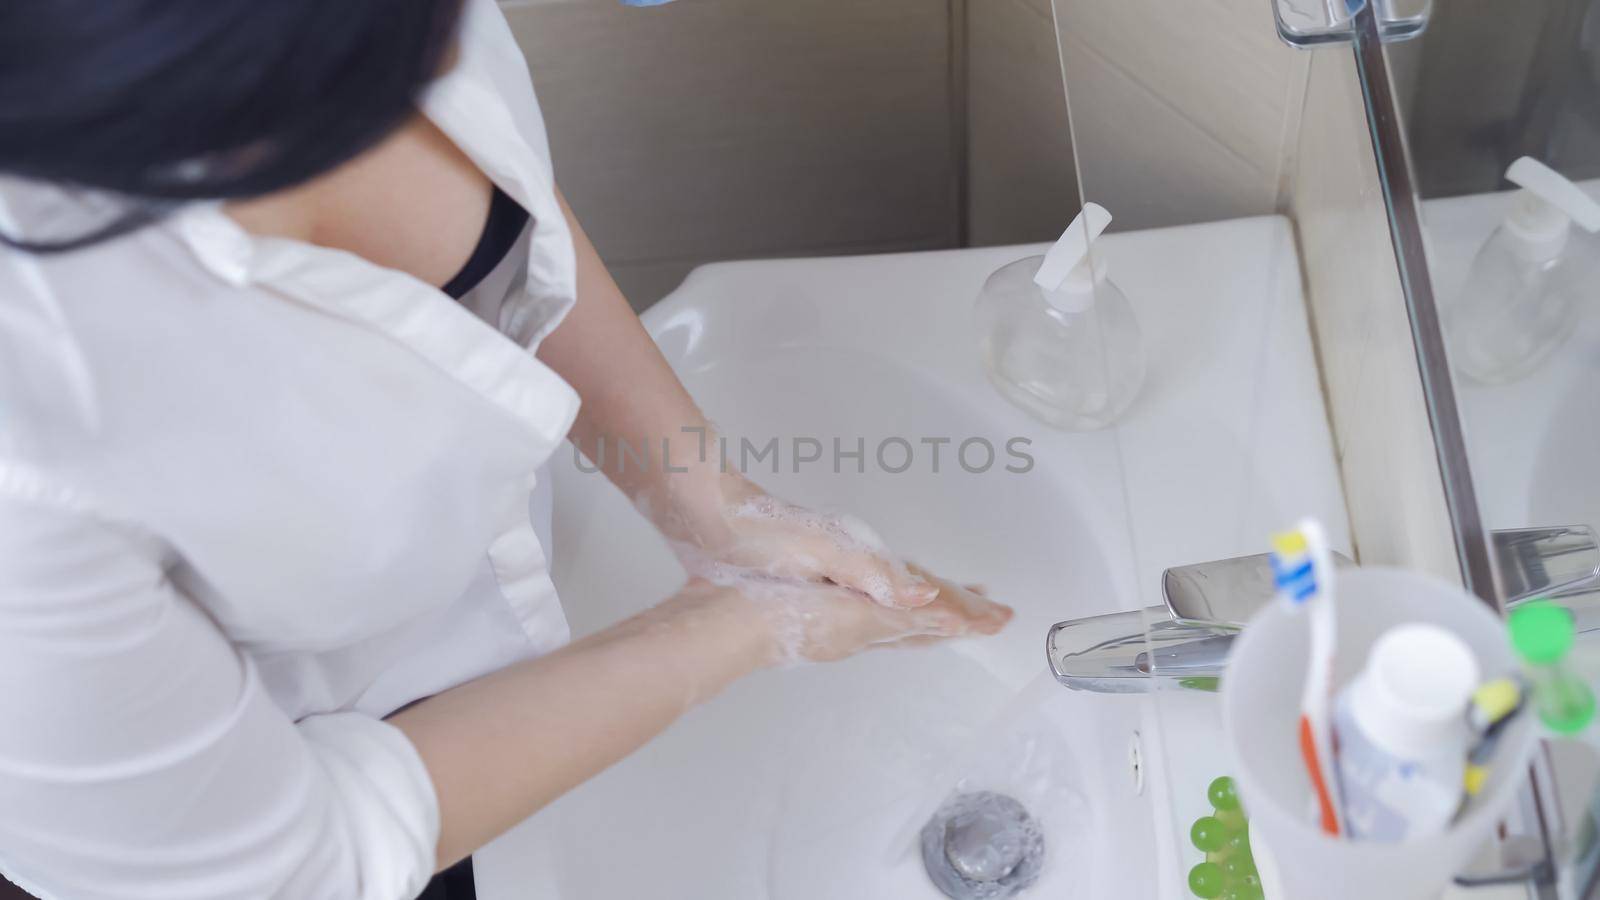 Sexy Woman Washes Her Hands, Woman In White Unbuttoned Shirt Exposes A Soaped Hand Under A Stream Of Water, Good Hygiene During Quarantine, High Angle View